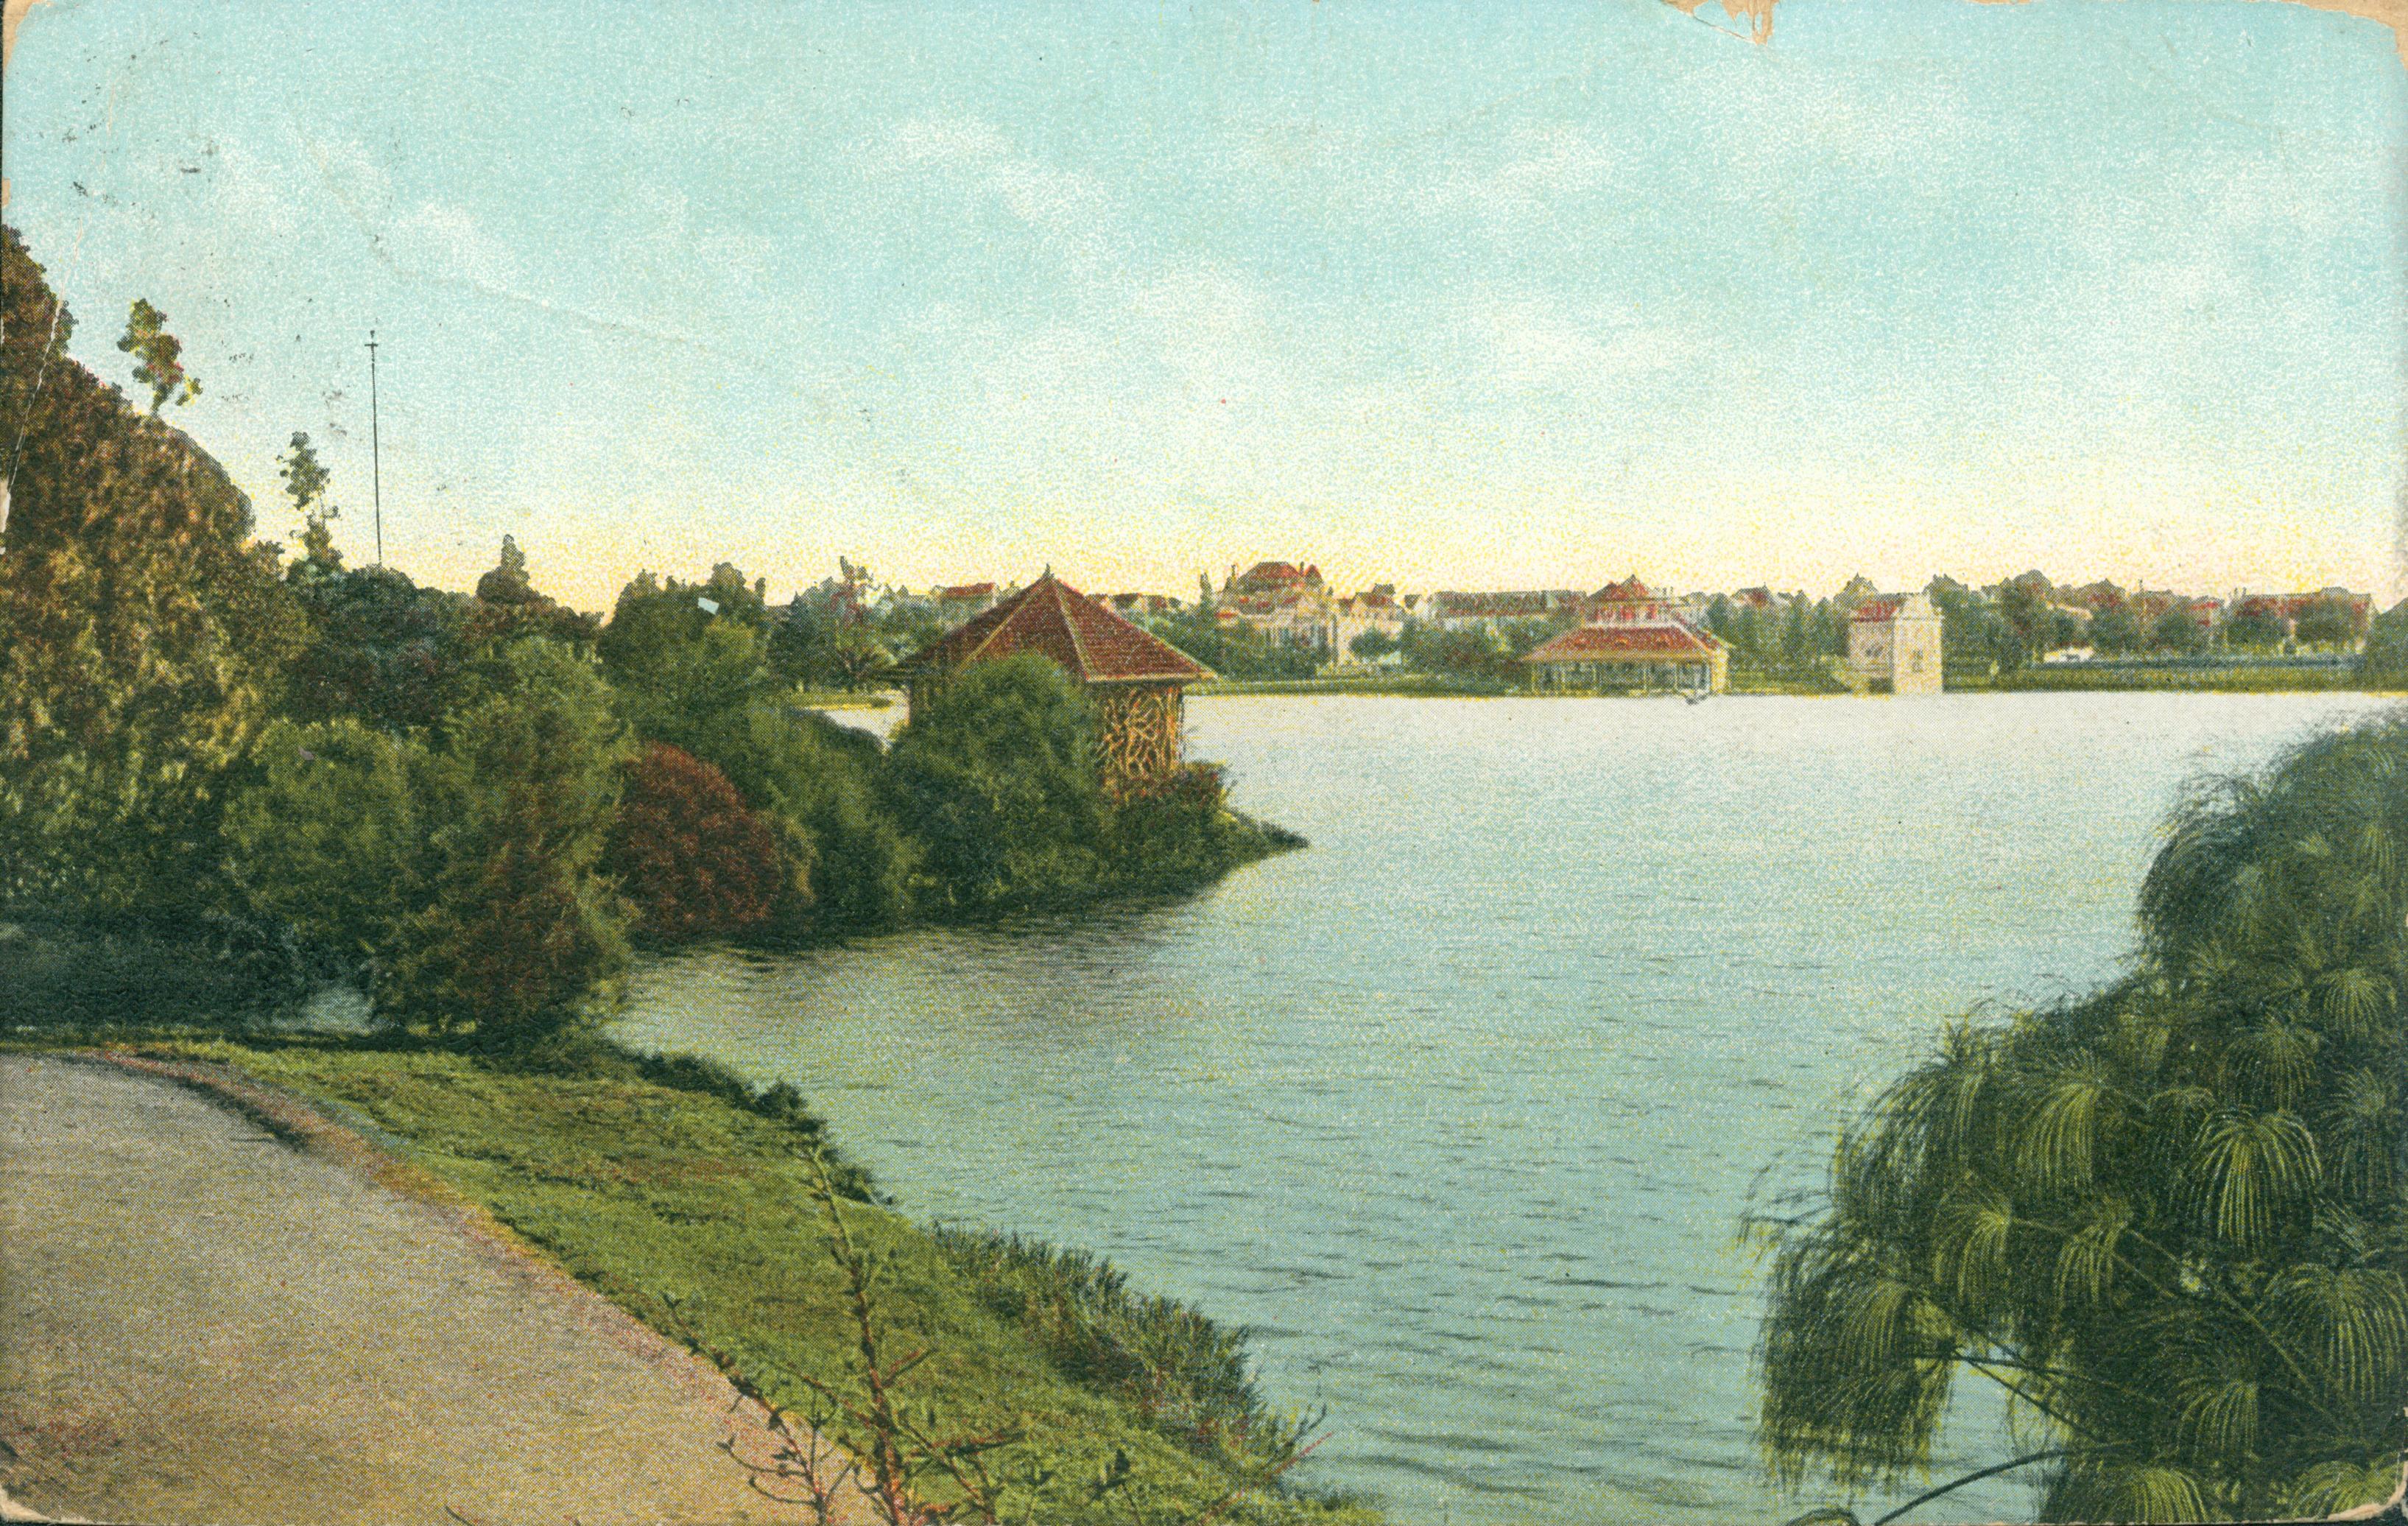 This postcard shows a path beside a lake with a gazebo on the left.